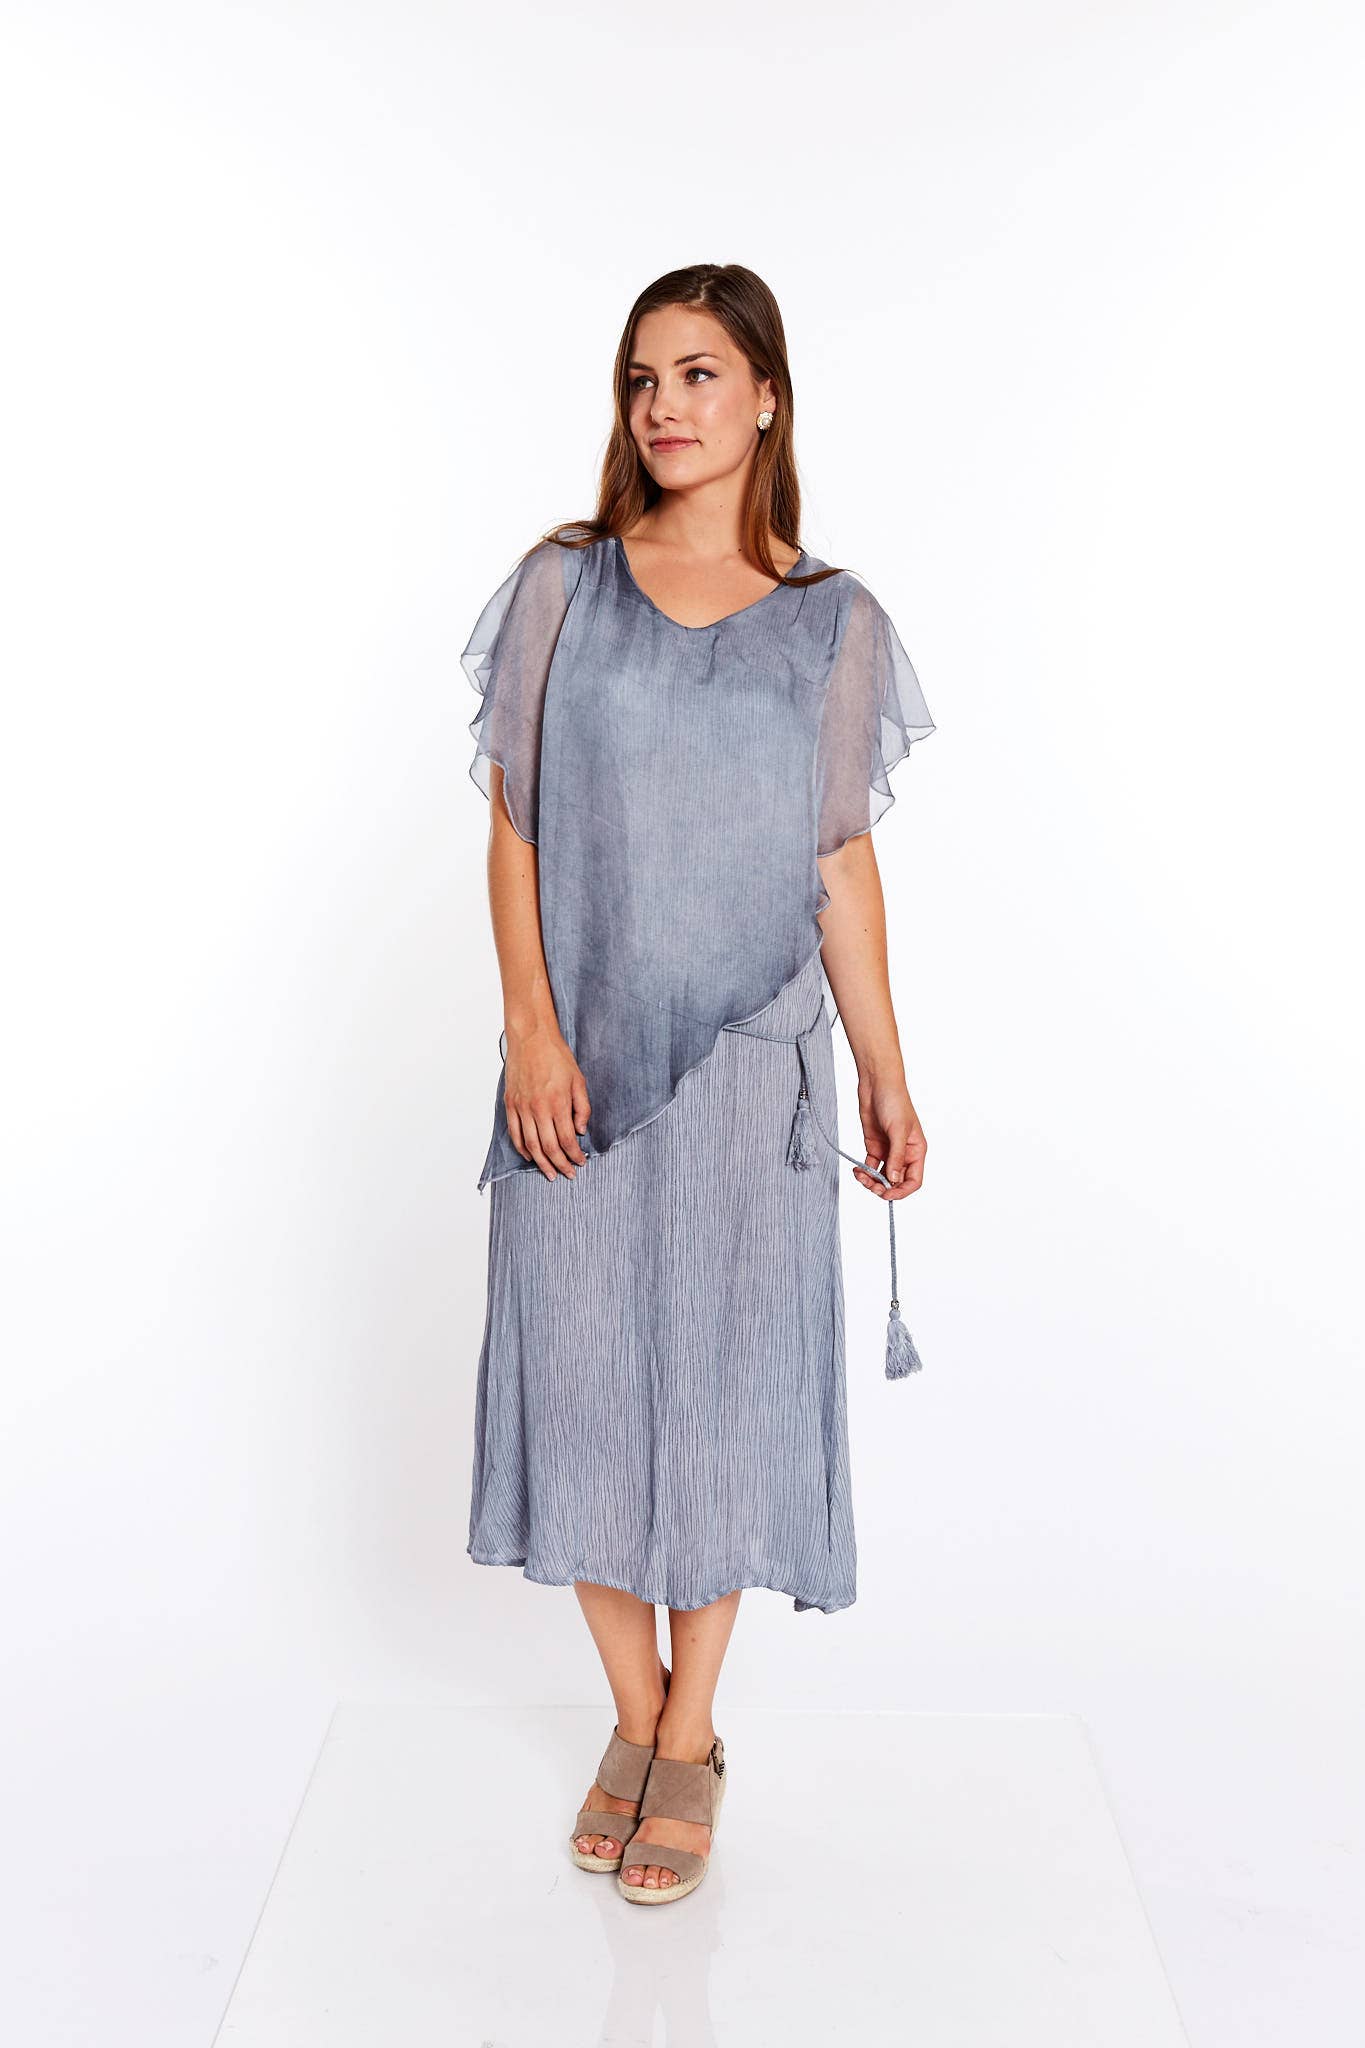 THE SCOOPY FLARED TASSEL TIED DRESS IN PALE GREY